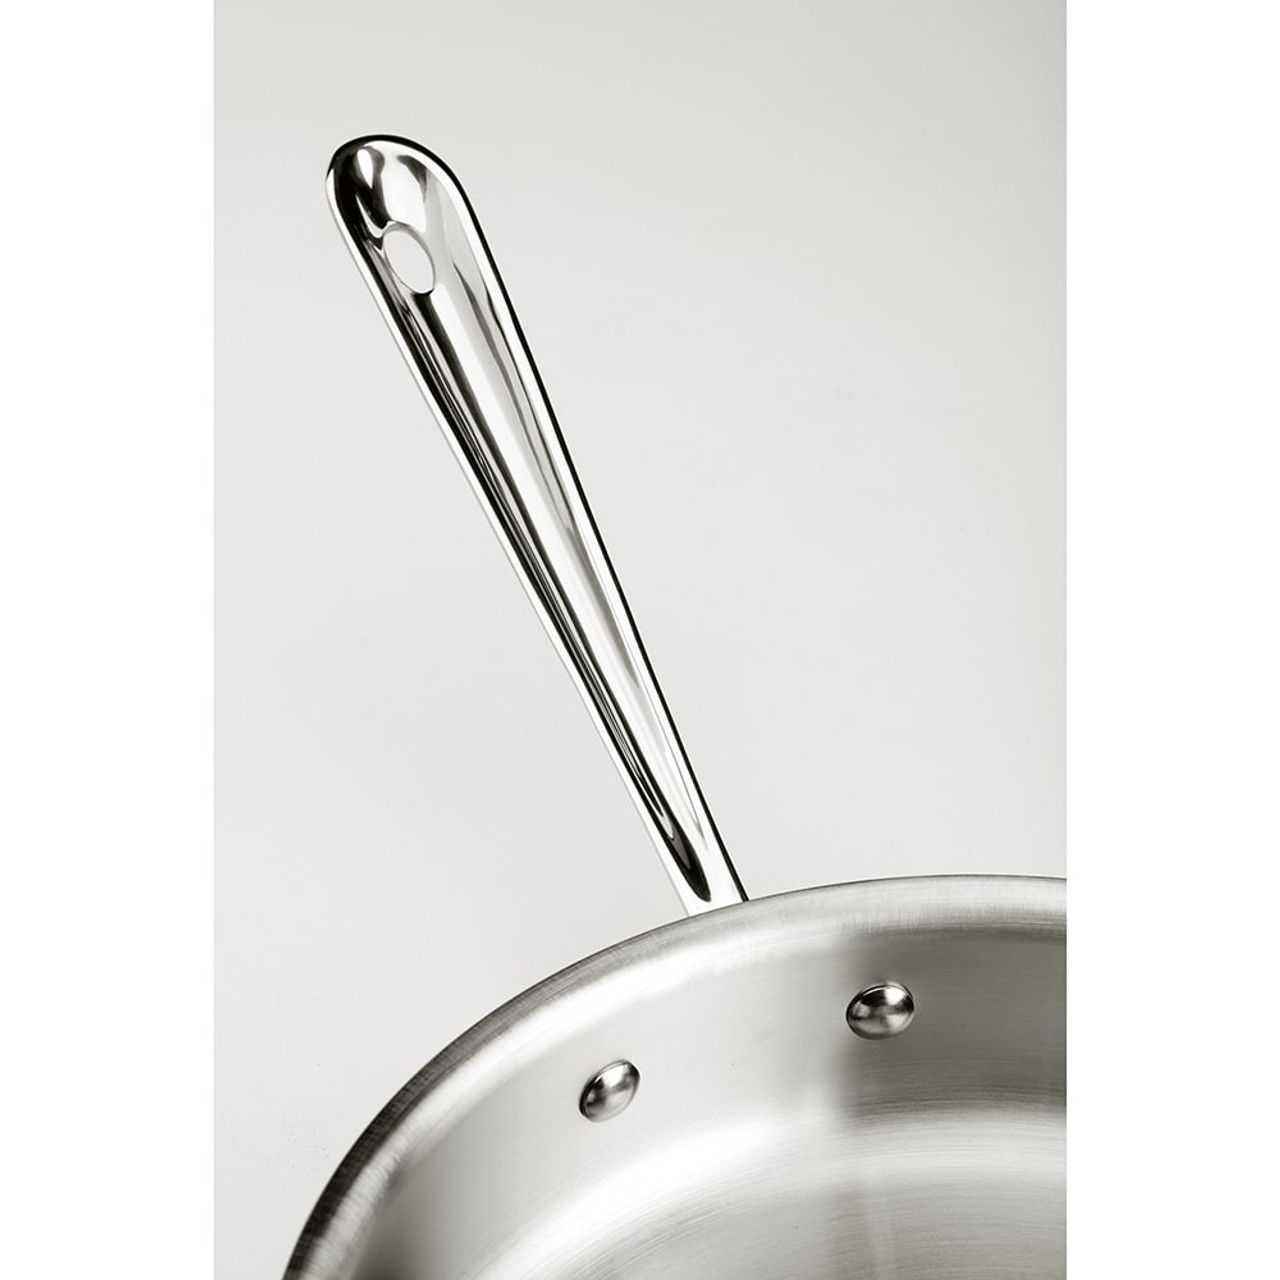 https://cdn11.bigcommerce.com/s-hccytny0od/images/stencil/1280x1280/products/3813/13771/all-clad-d3-stainless-steel-fry-pan-lid-2__39741.1607606399.jpg?c=2?imbypass=on